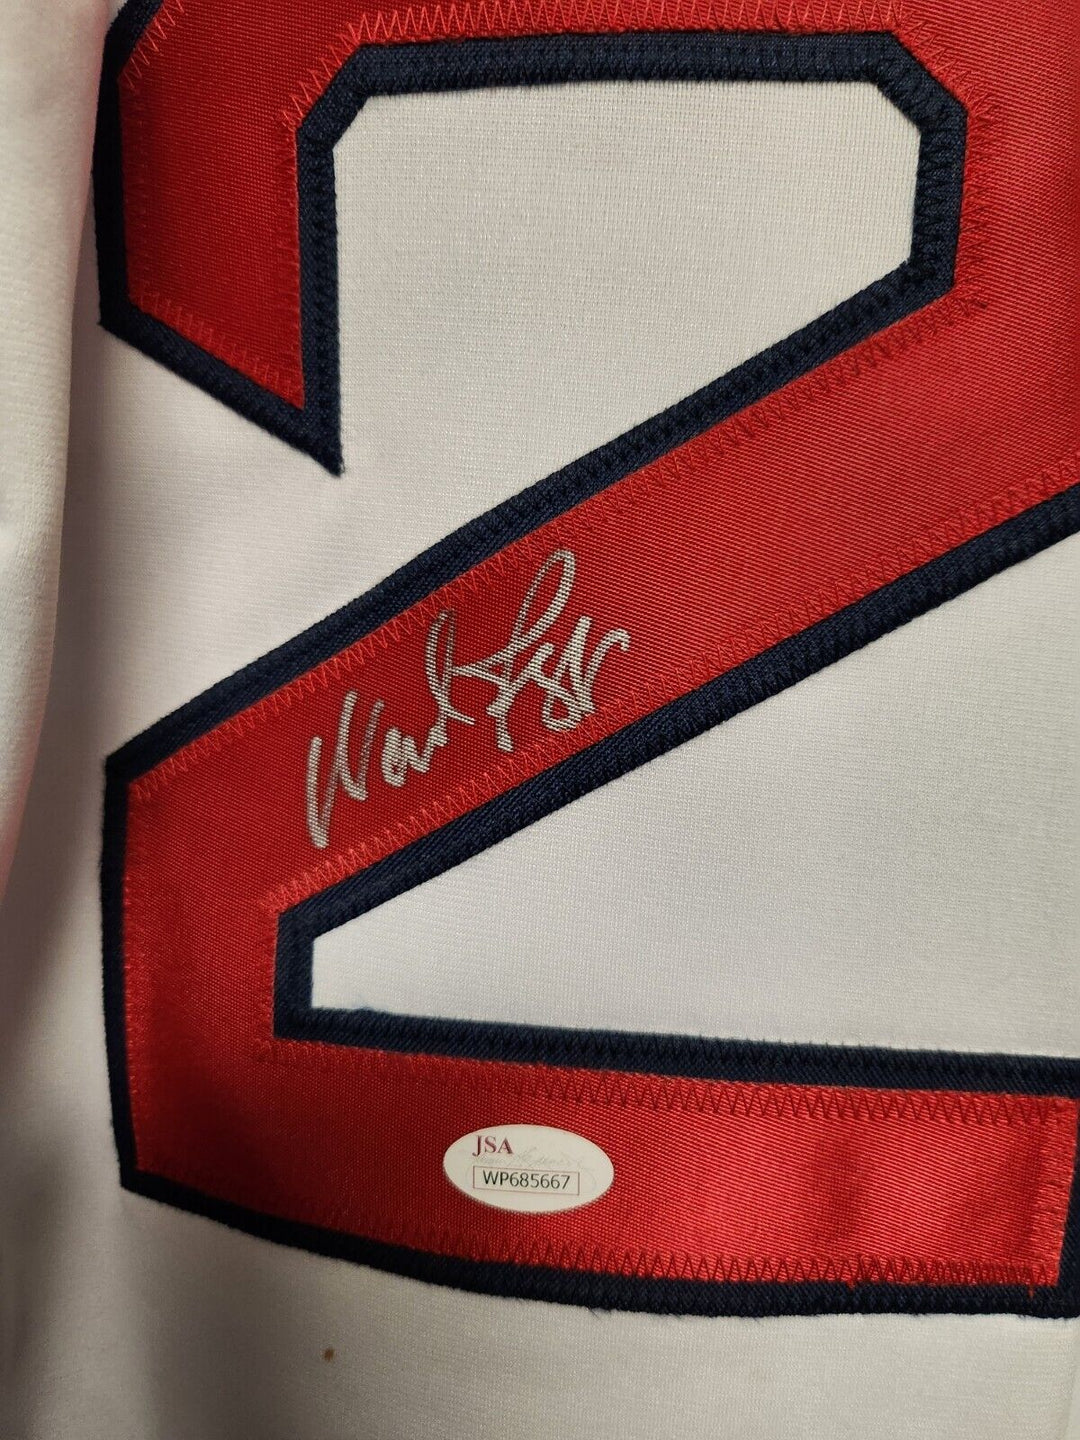 Wade Boggs Autographed Boston Red Sox Home Jersey JSA HOF